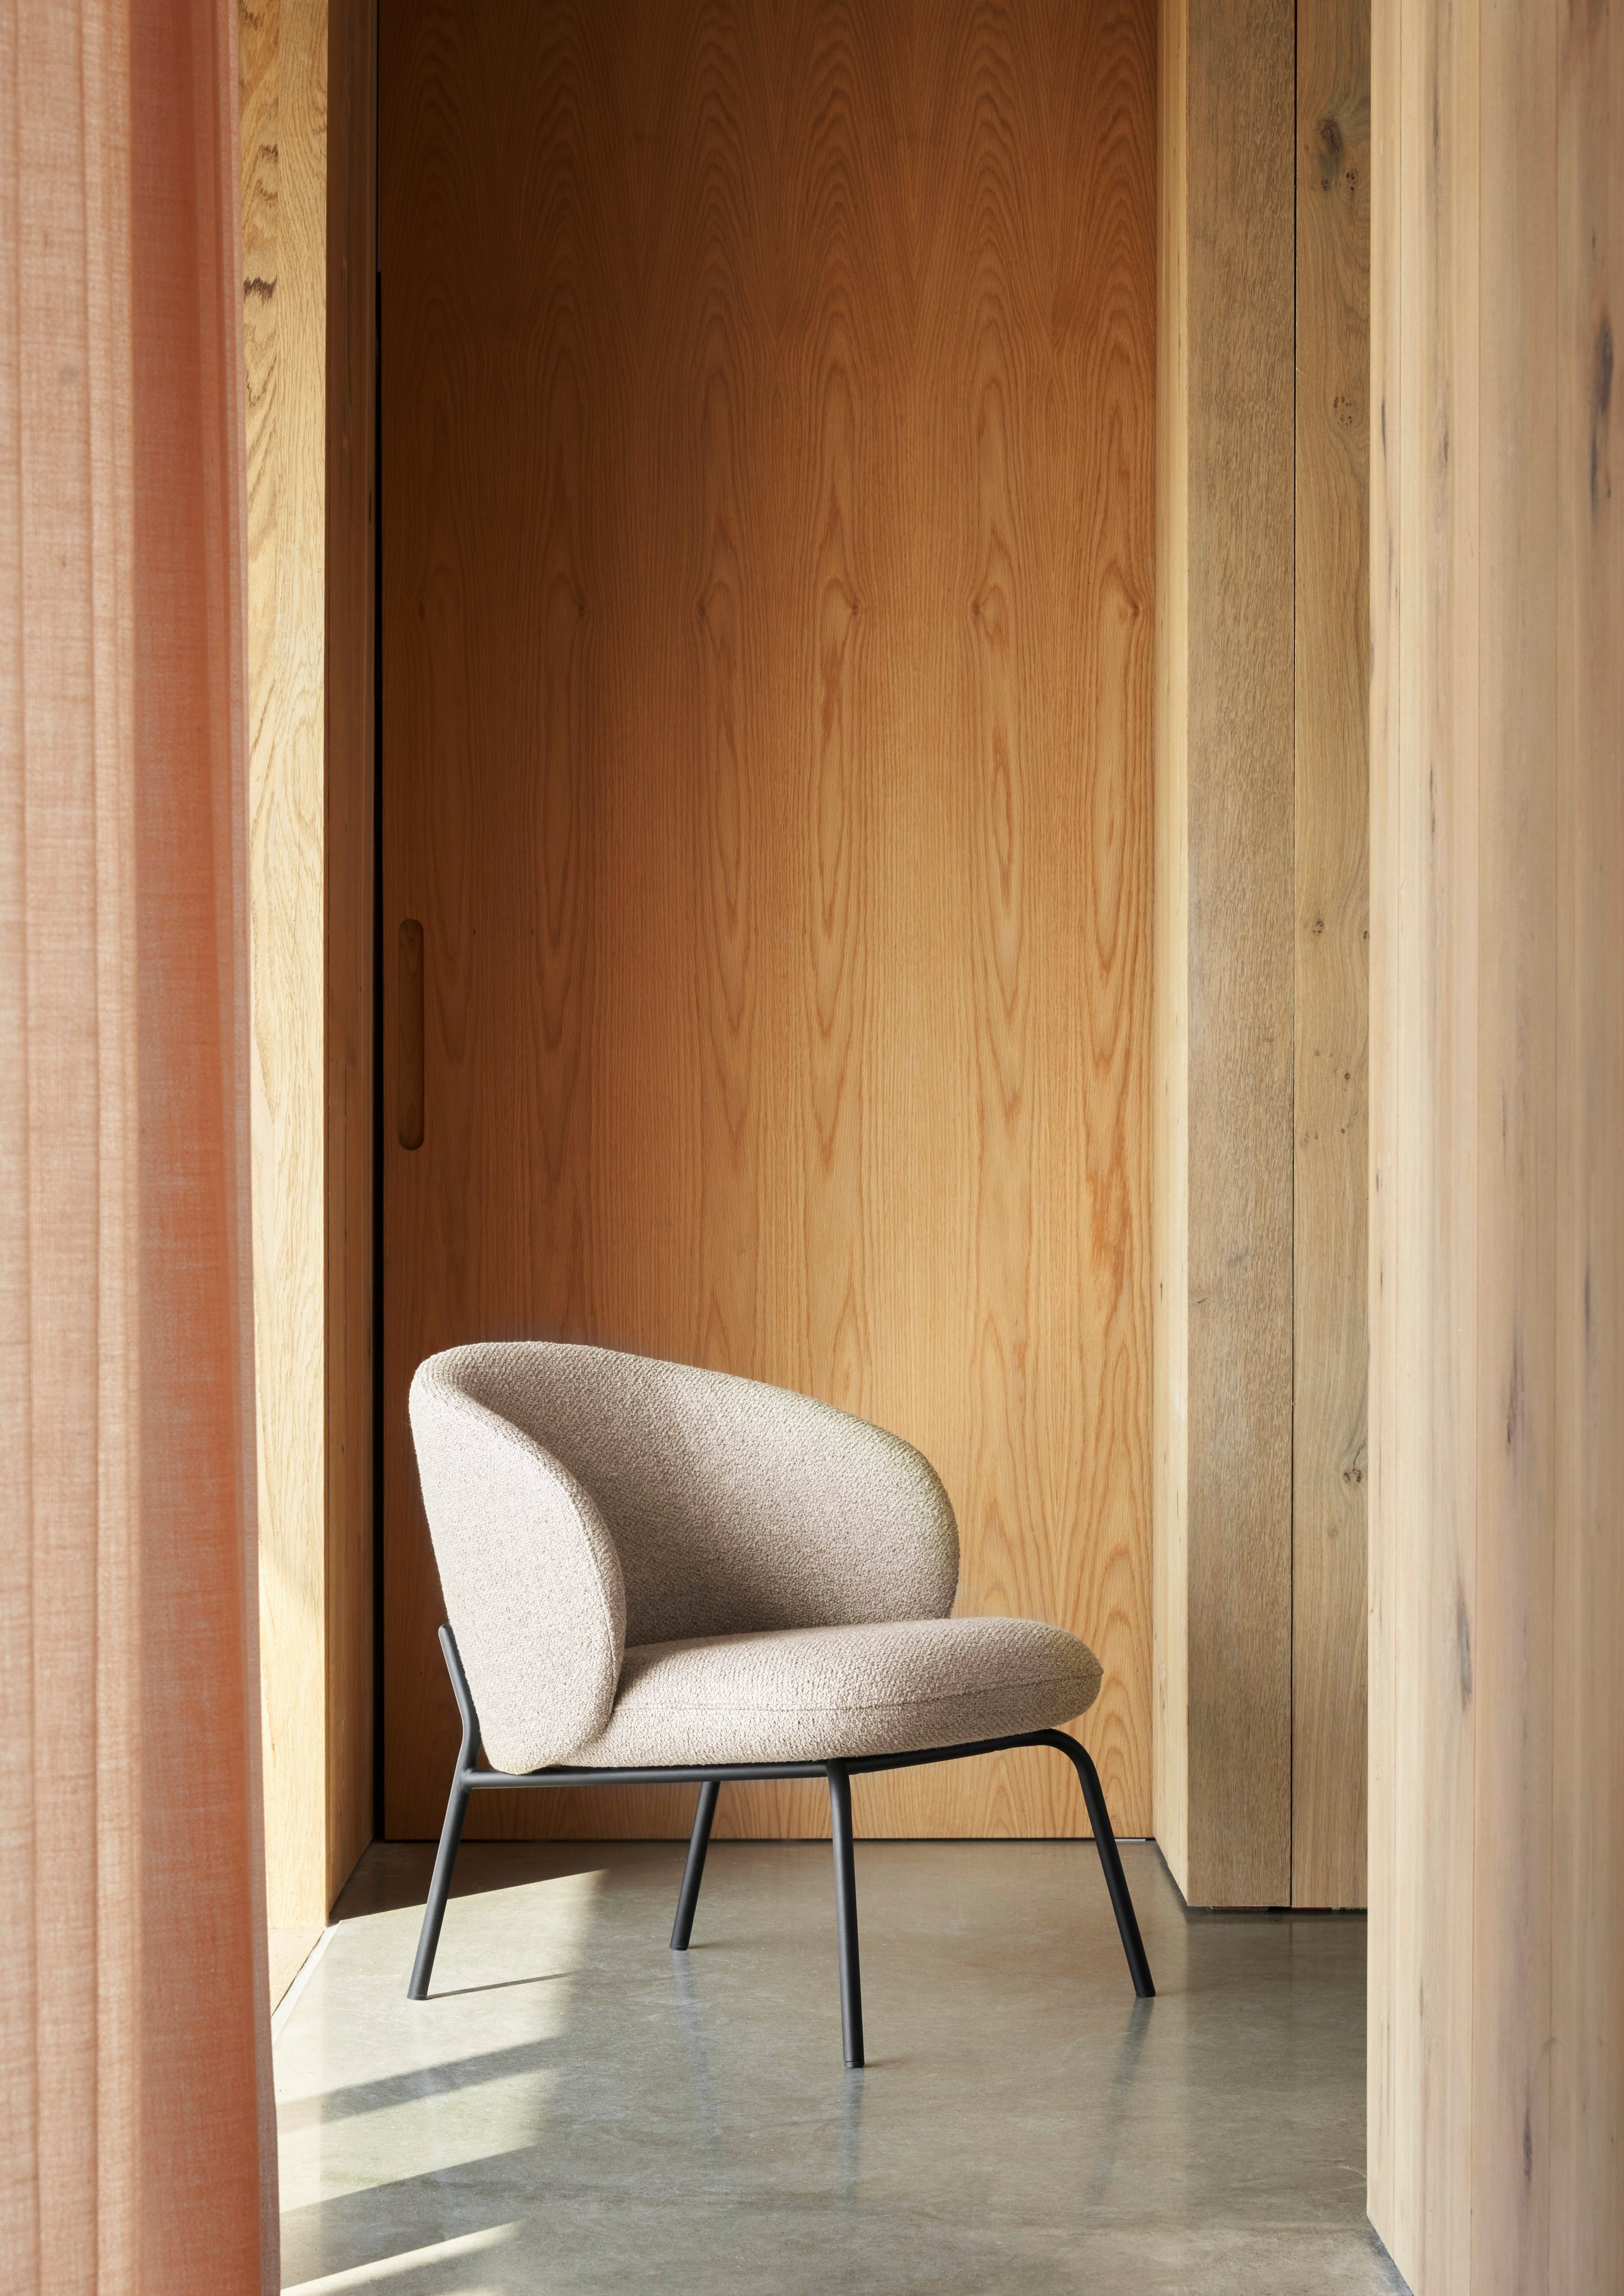 Modern chair with beige upholstery and black frame in a sunlit wooden interior.